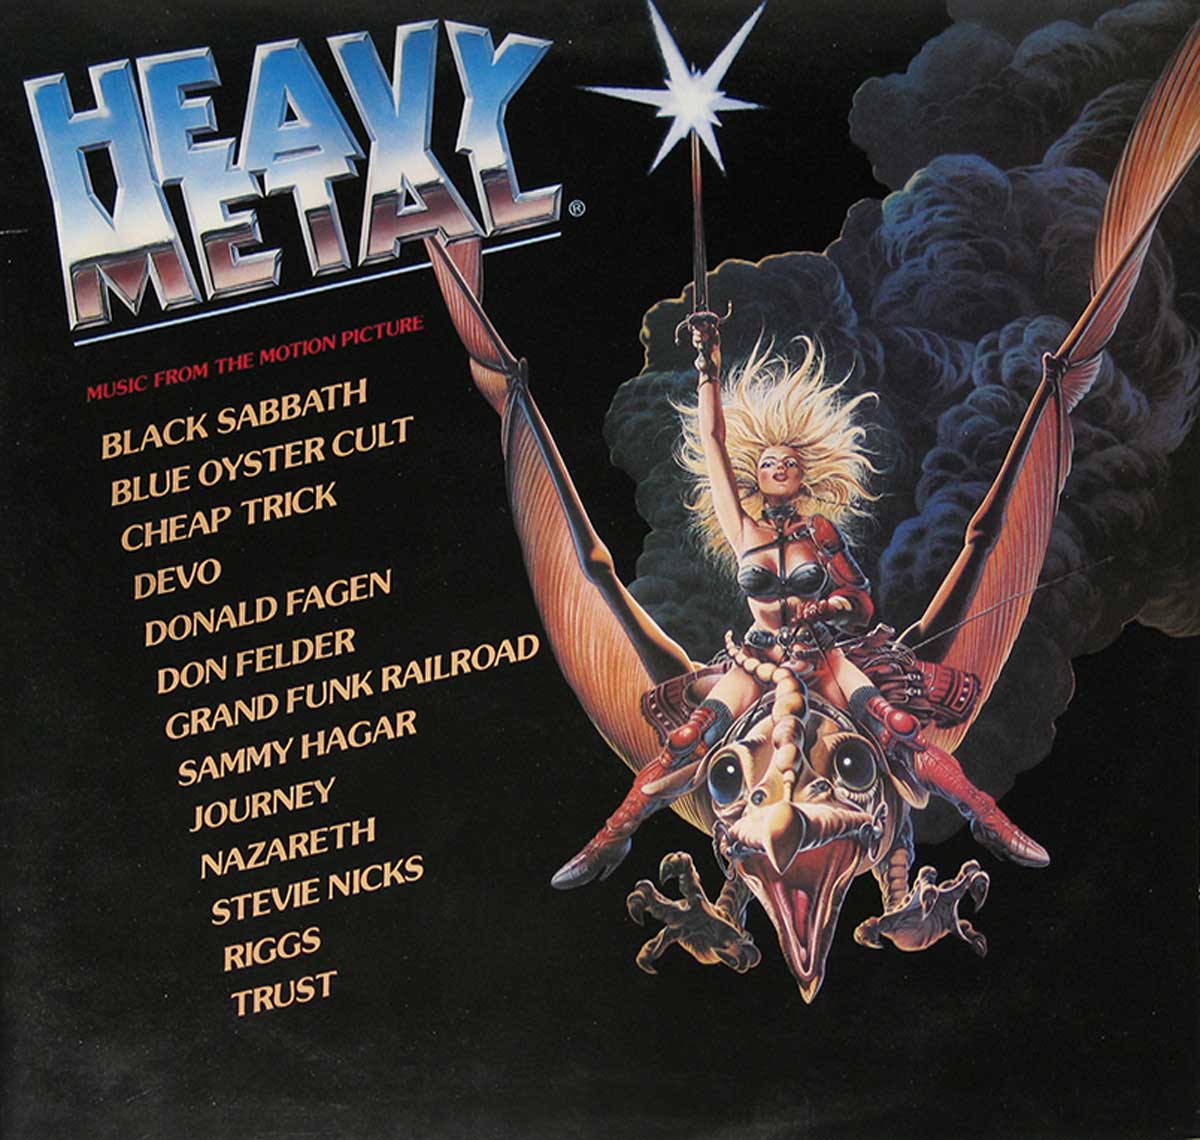 large album front cover photo of: HEAVY METAL MUSIC FROM THE MOTION PICTURE 